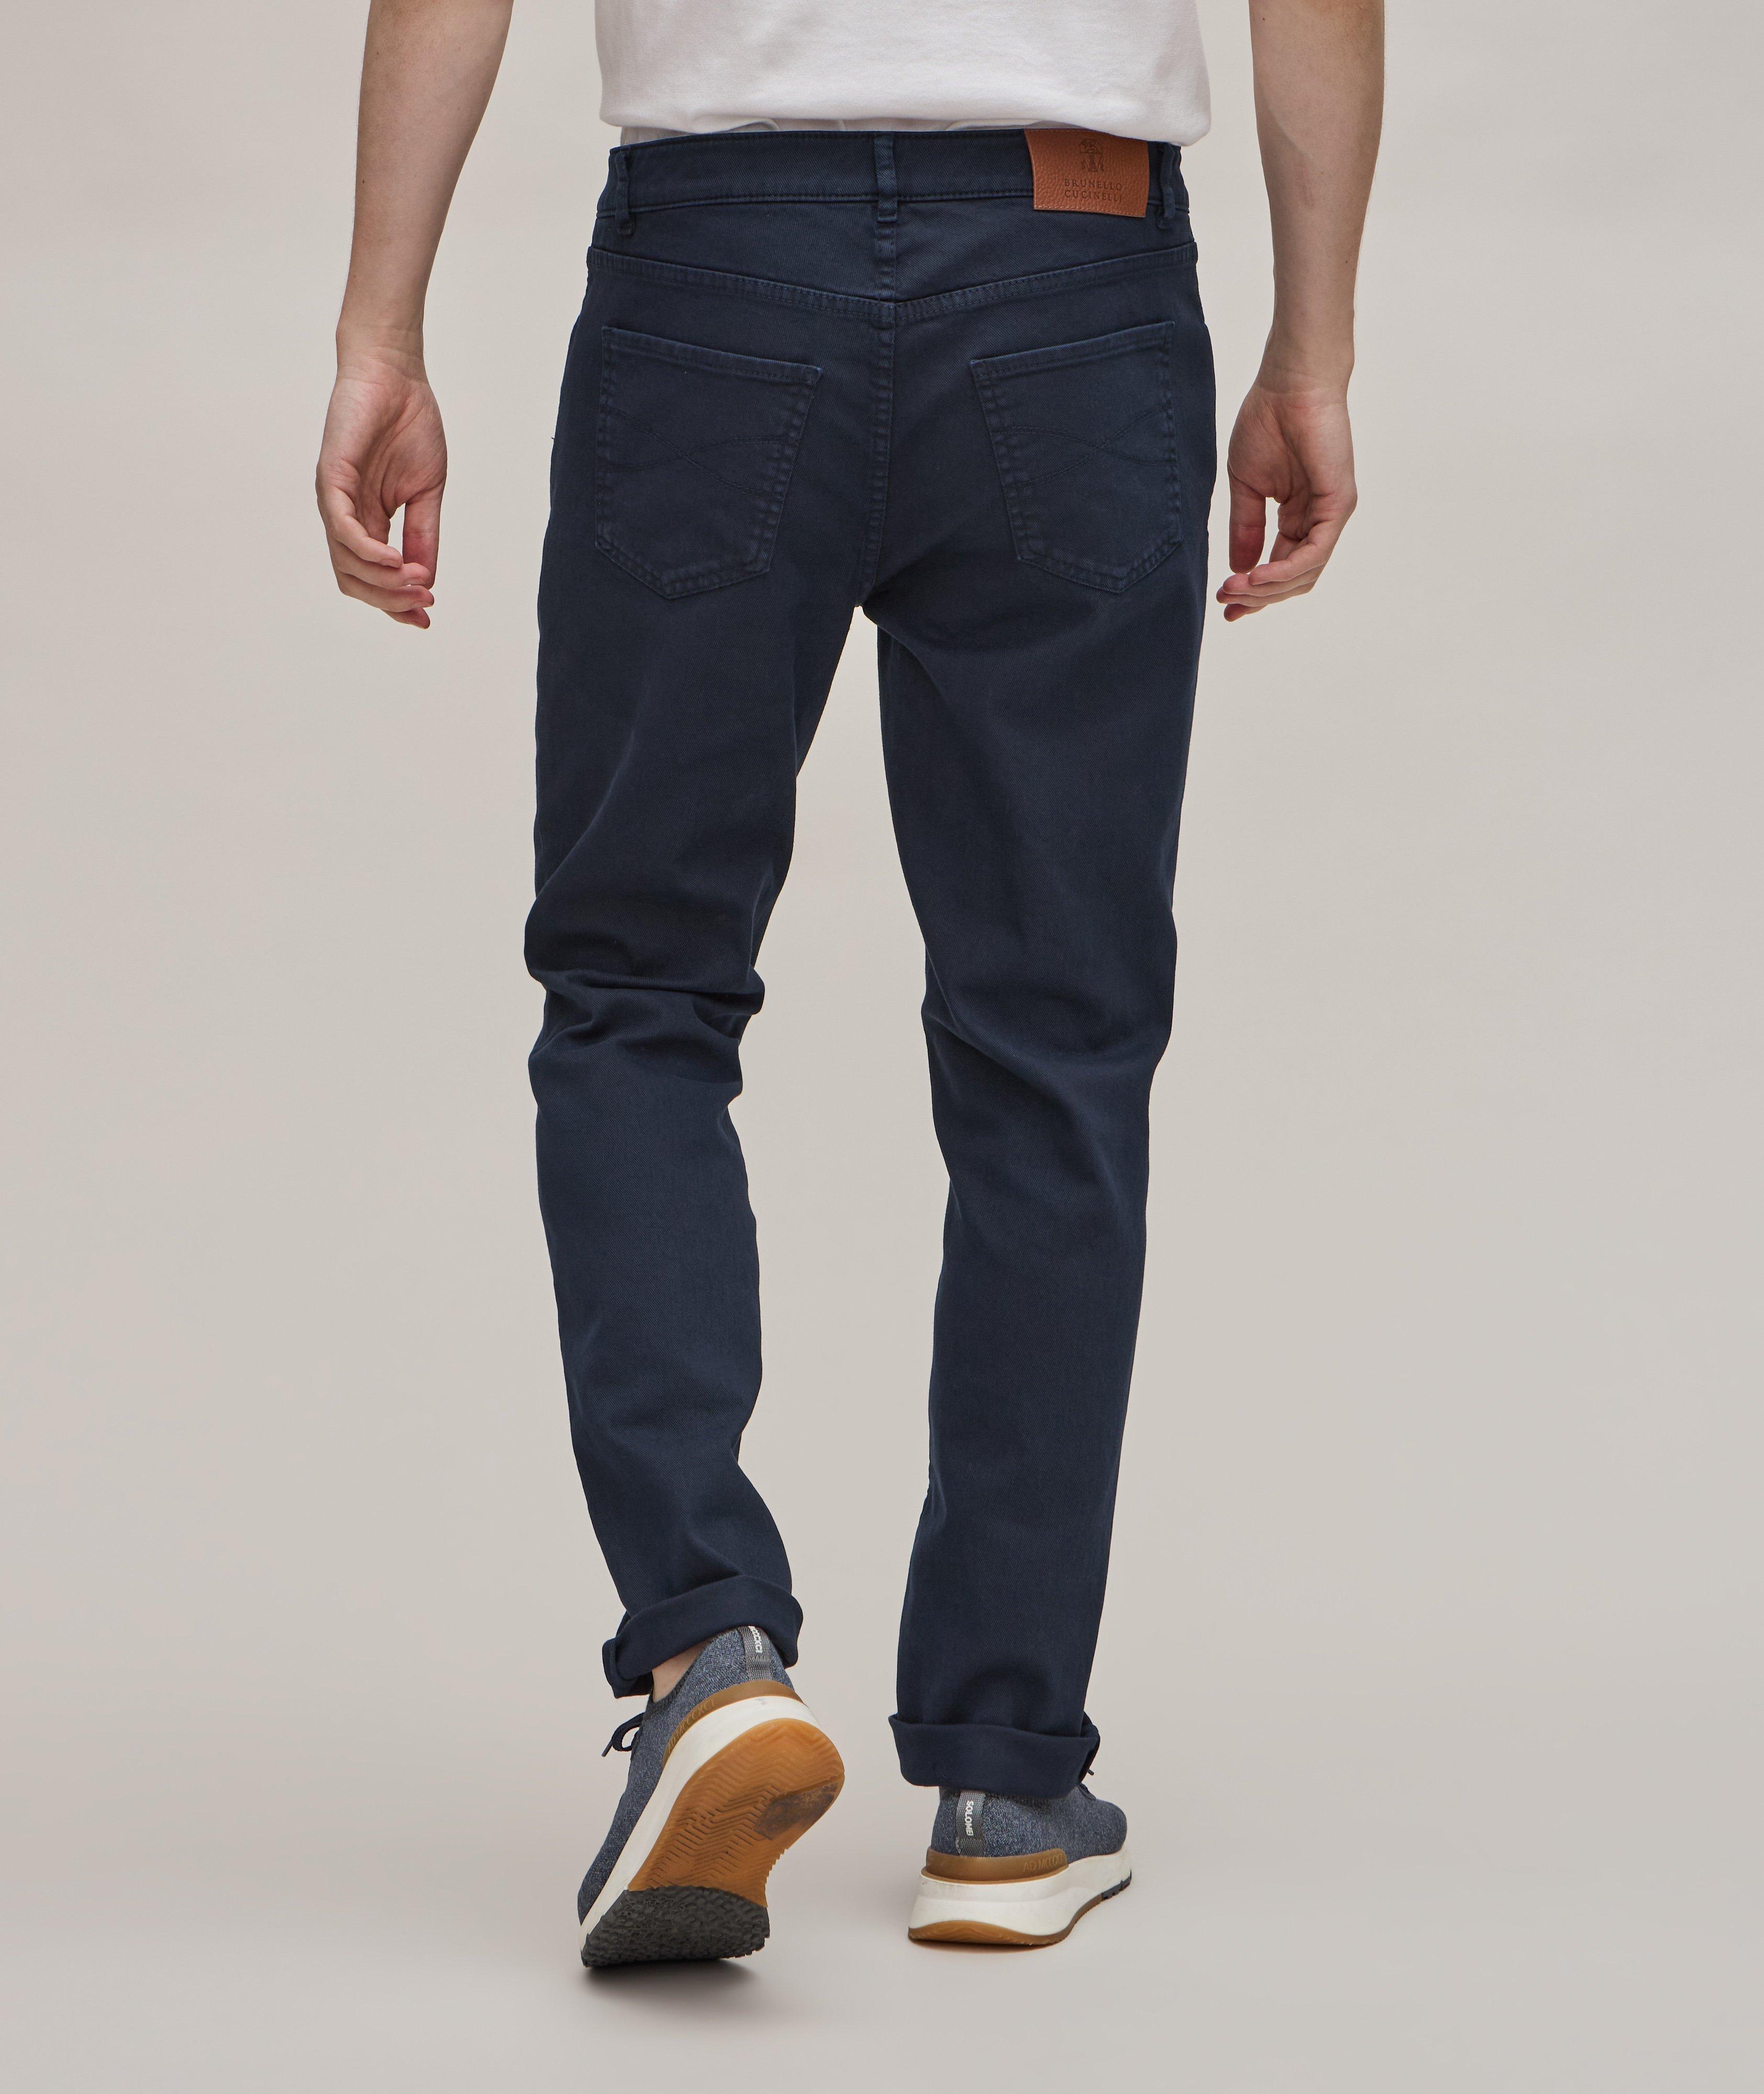 Overdyed Stretch-Cotton Jeans image 5